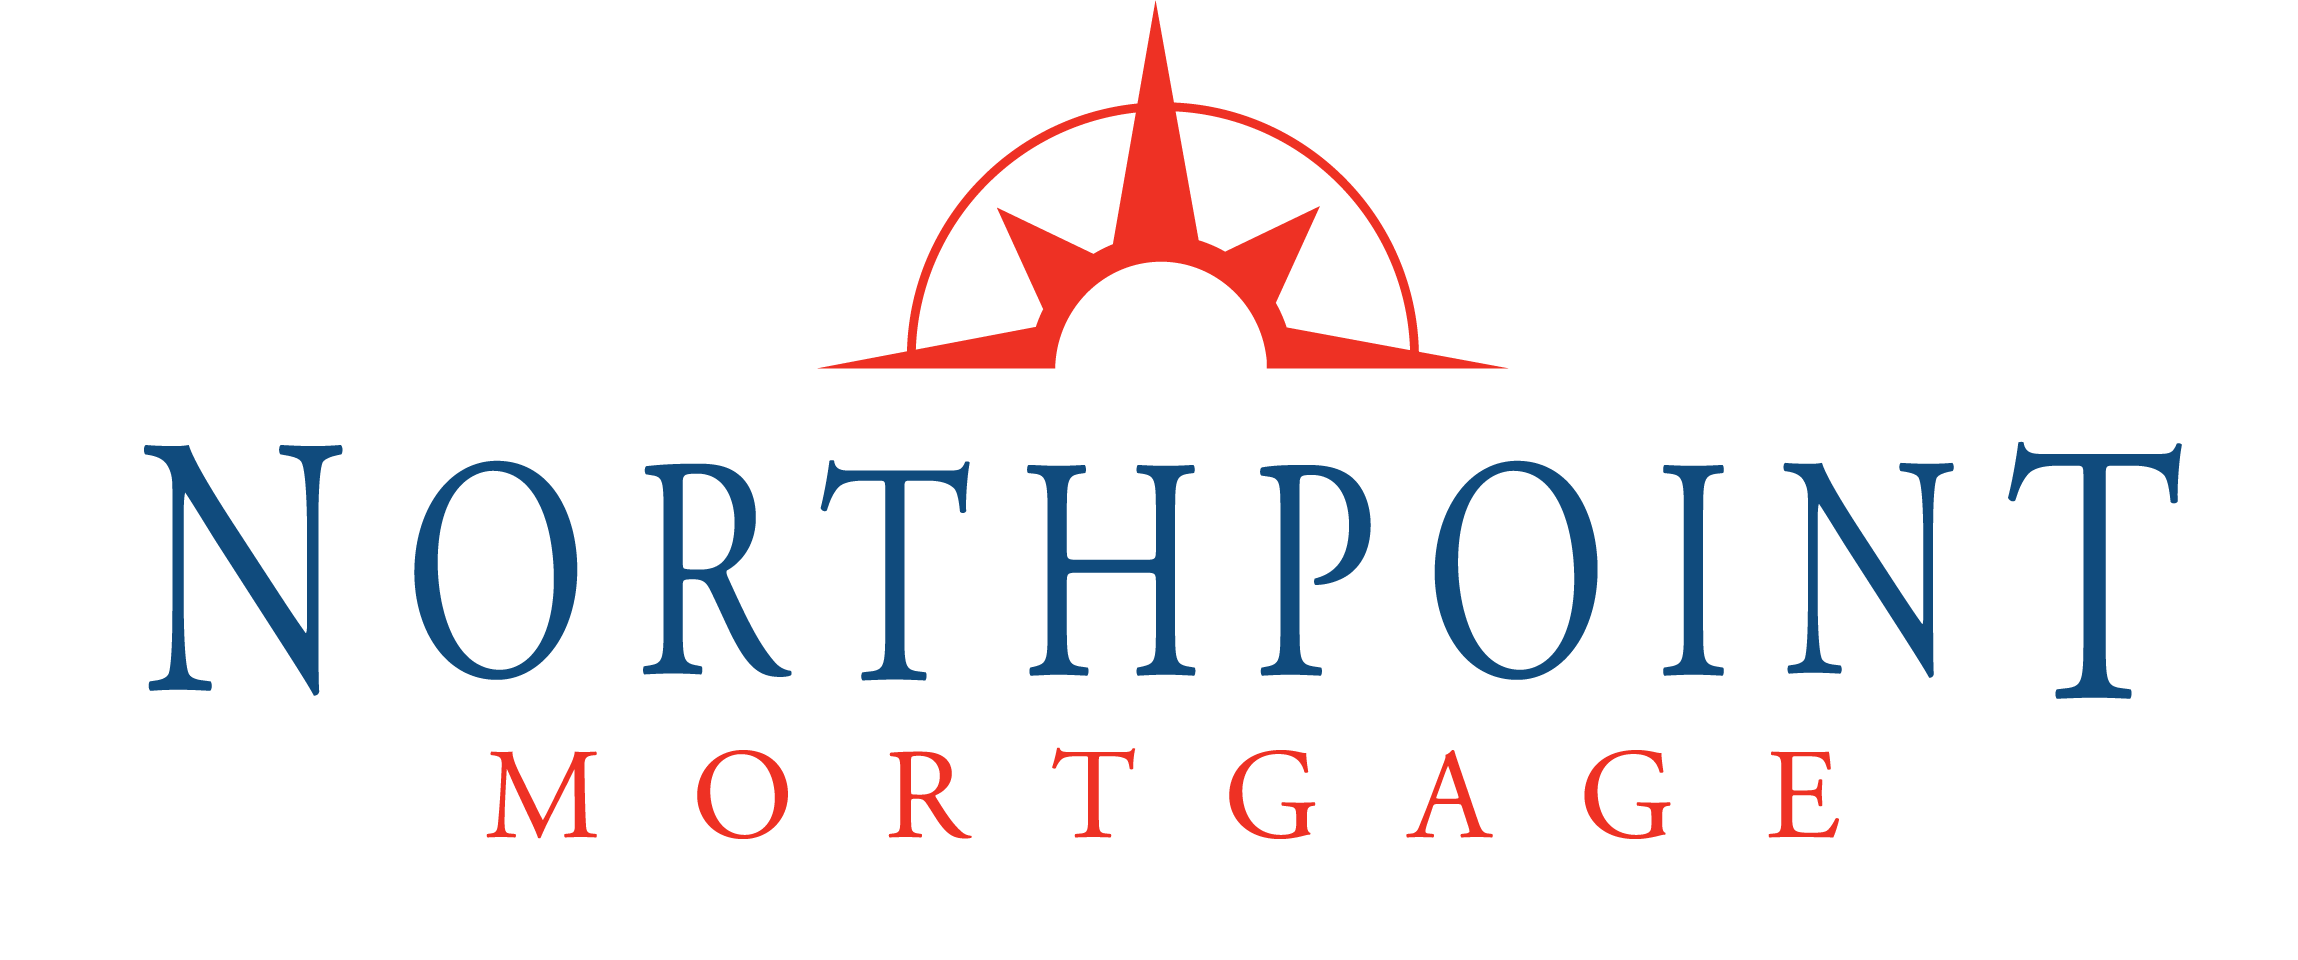 northpont mortgages logo